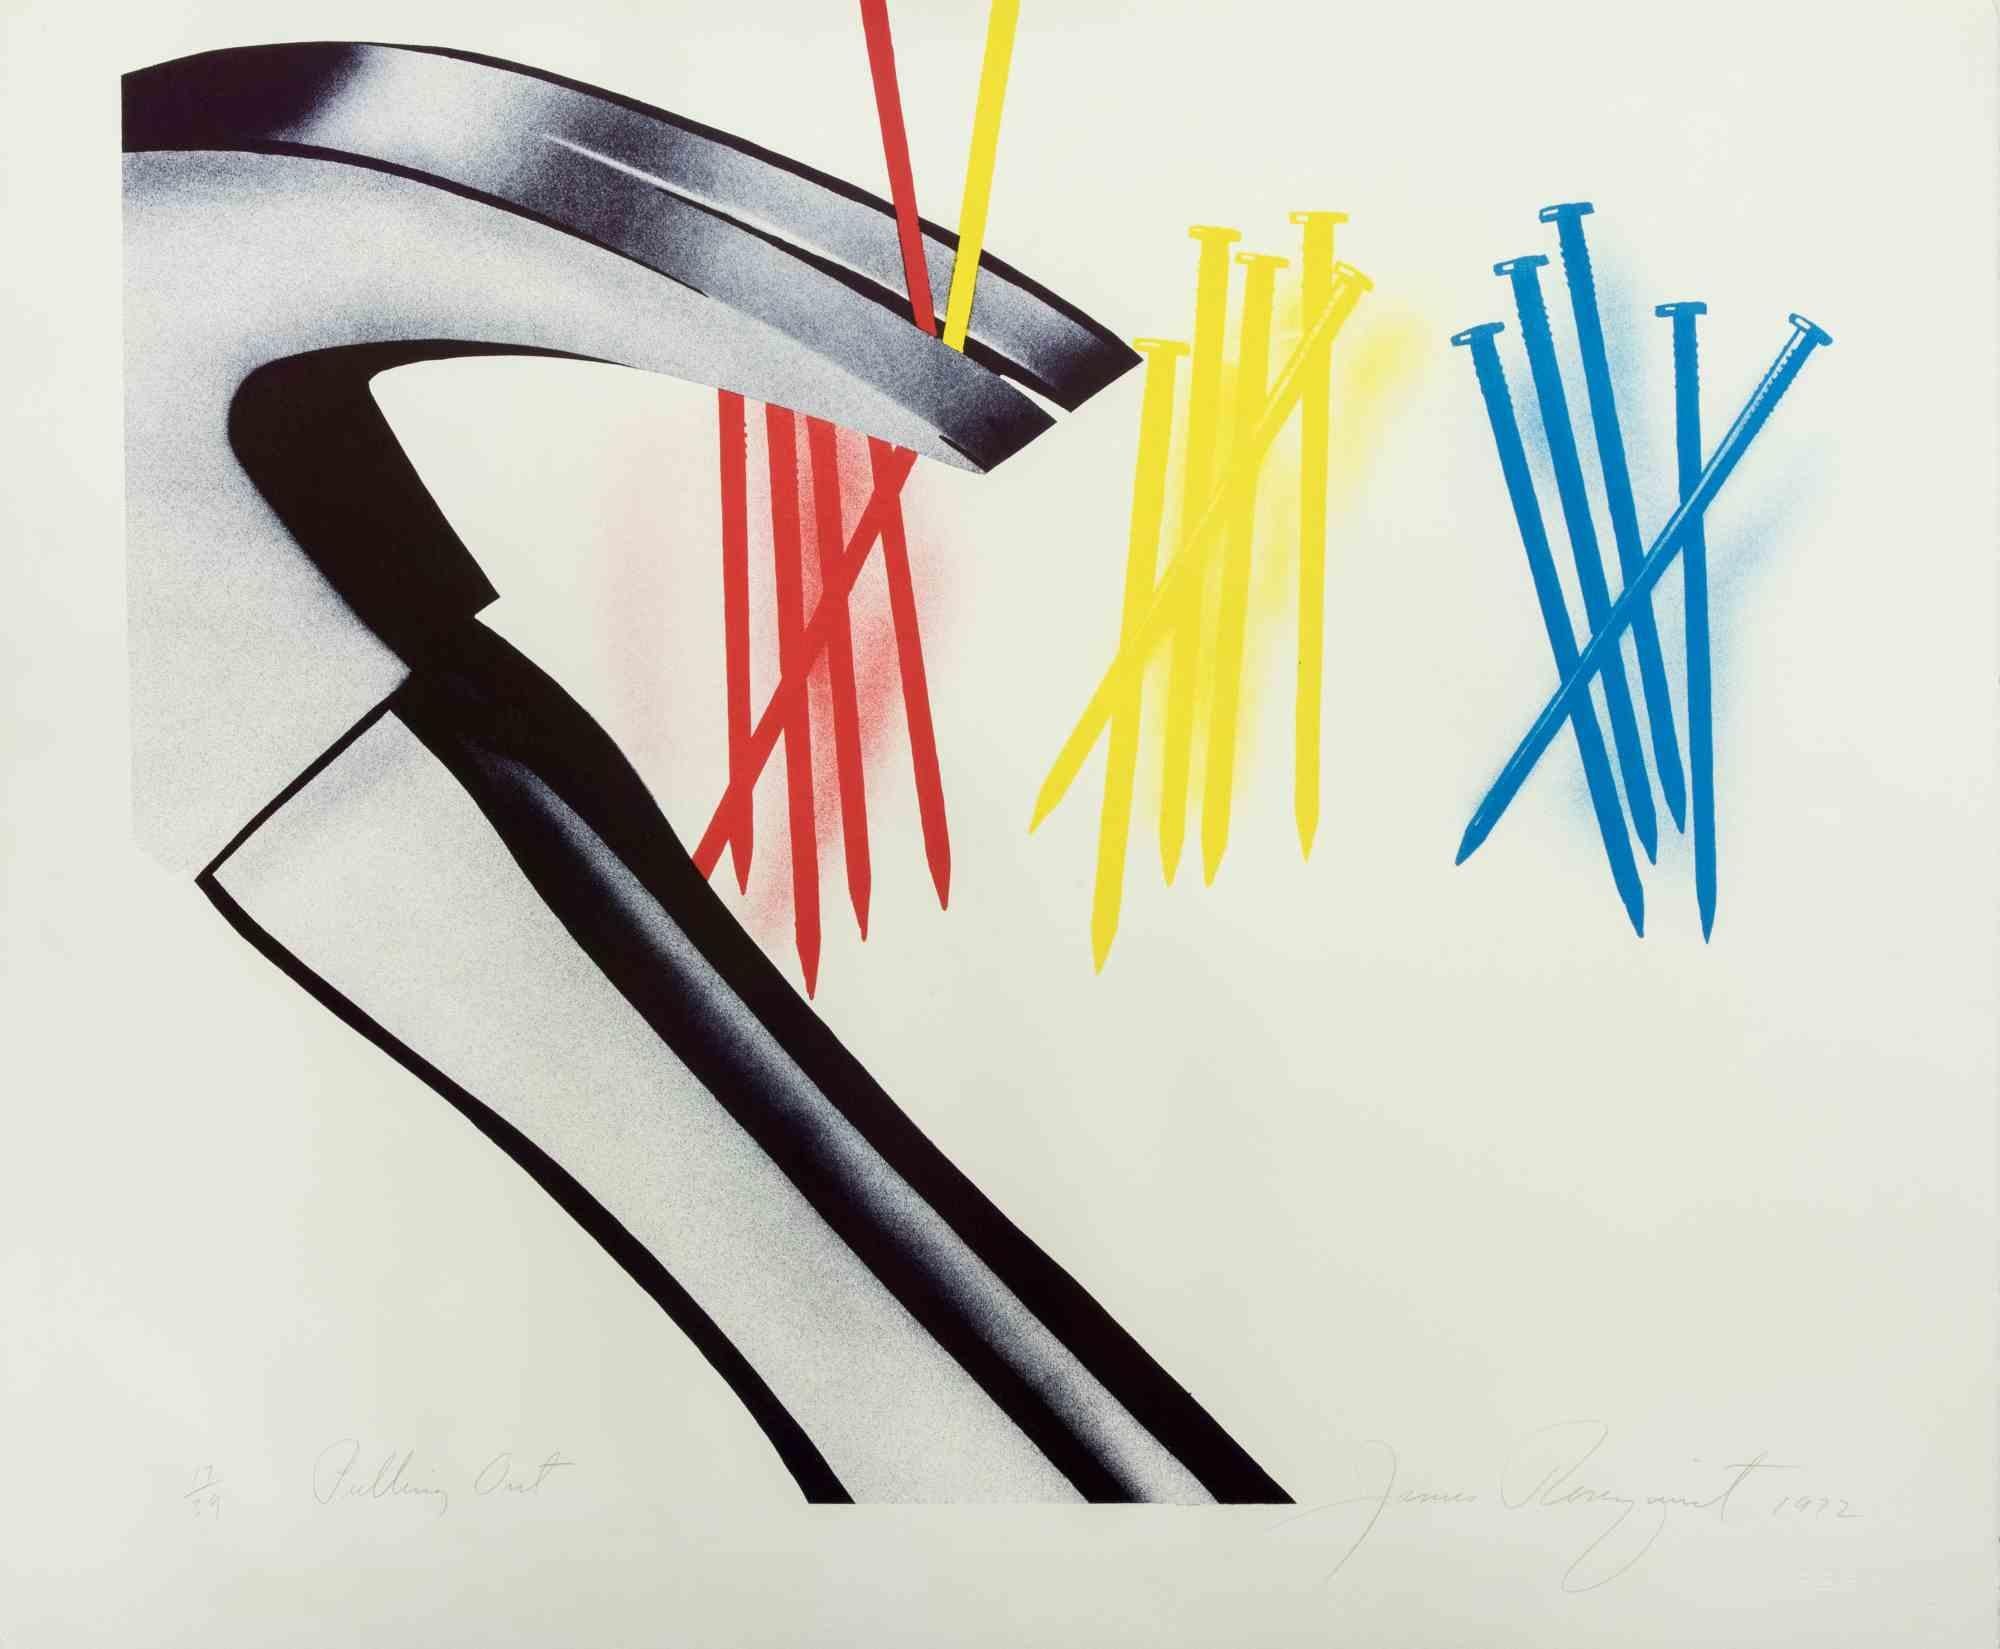 Pulling Out is an artwork realized in 1972 by James Rosenquist.

Color Lithograph on Arches paper.

Hand-signed and dated by James Rosenquist (North Dakota, 1933 – 2017) in pencil in the lower right margin.

Printed and published by Petersburg